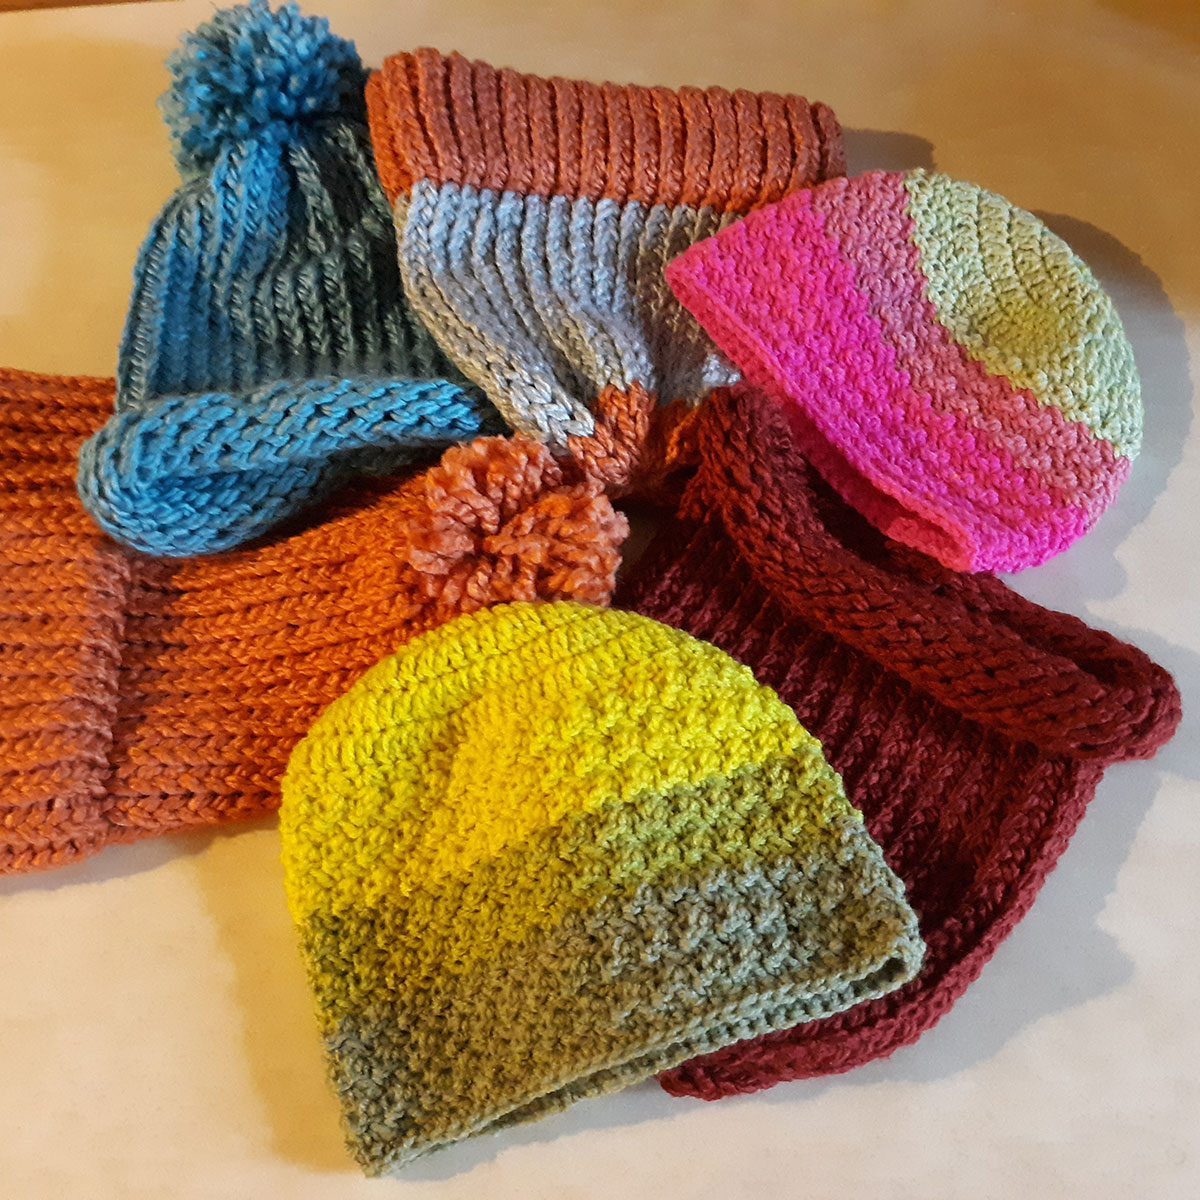 Six colorful knitted hats ready for donation to Hatsgiving